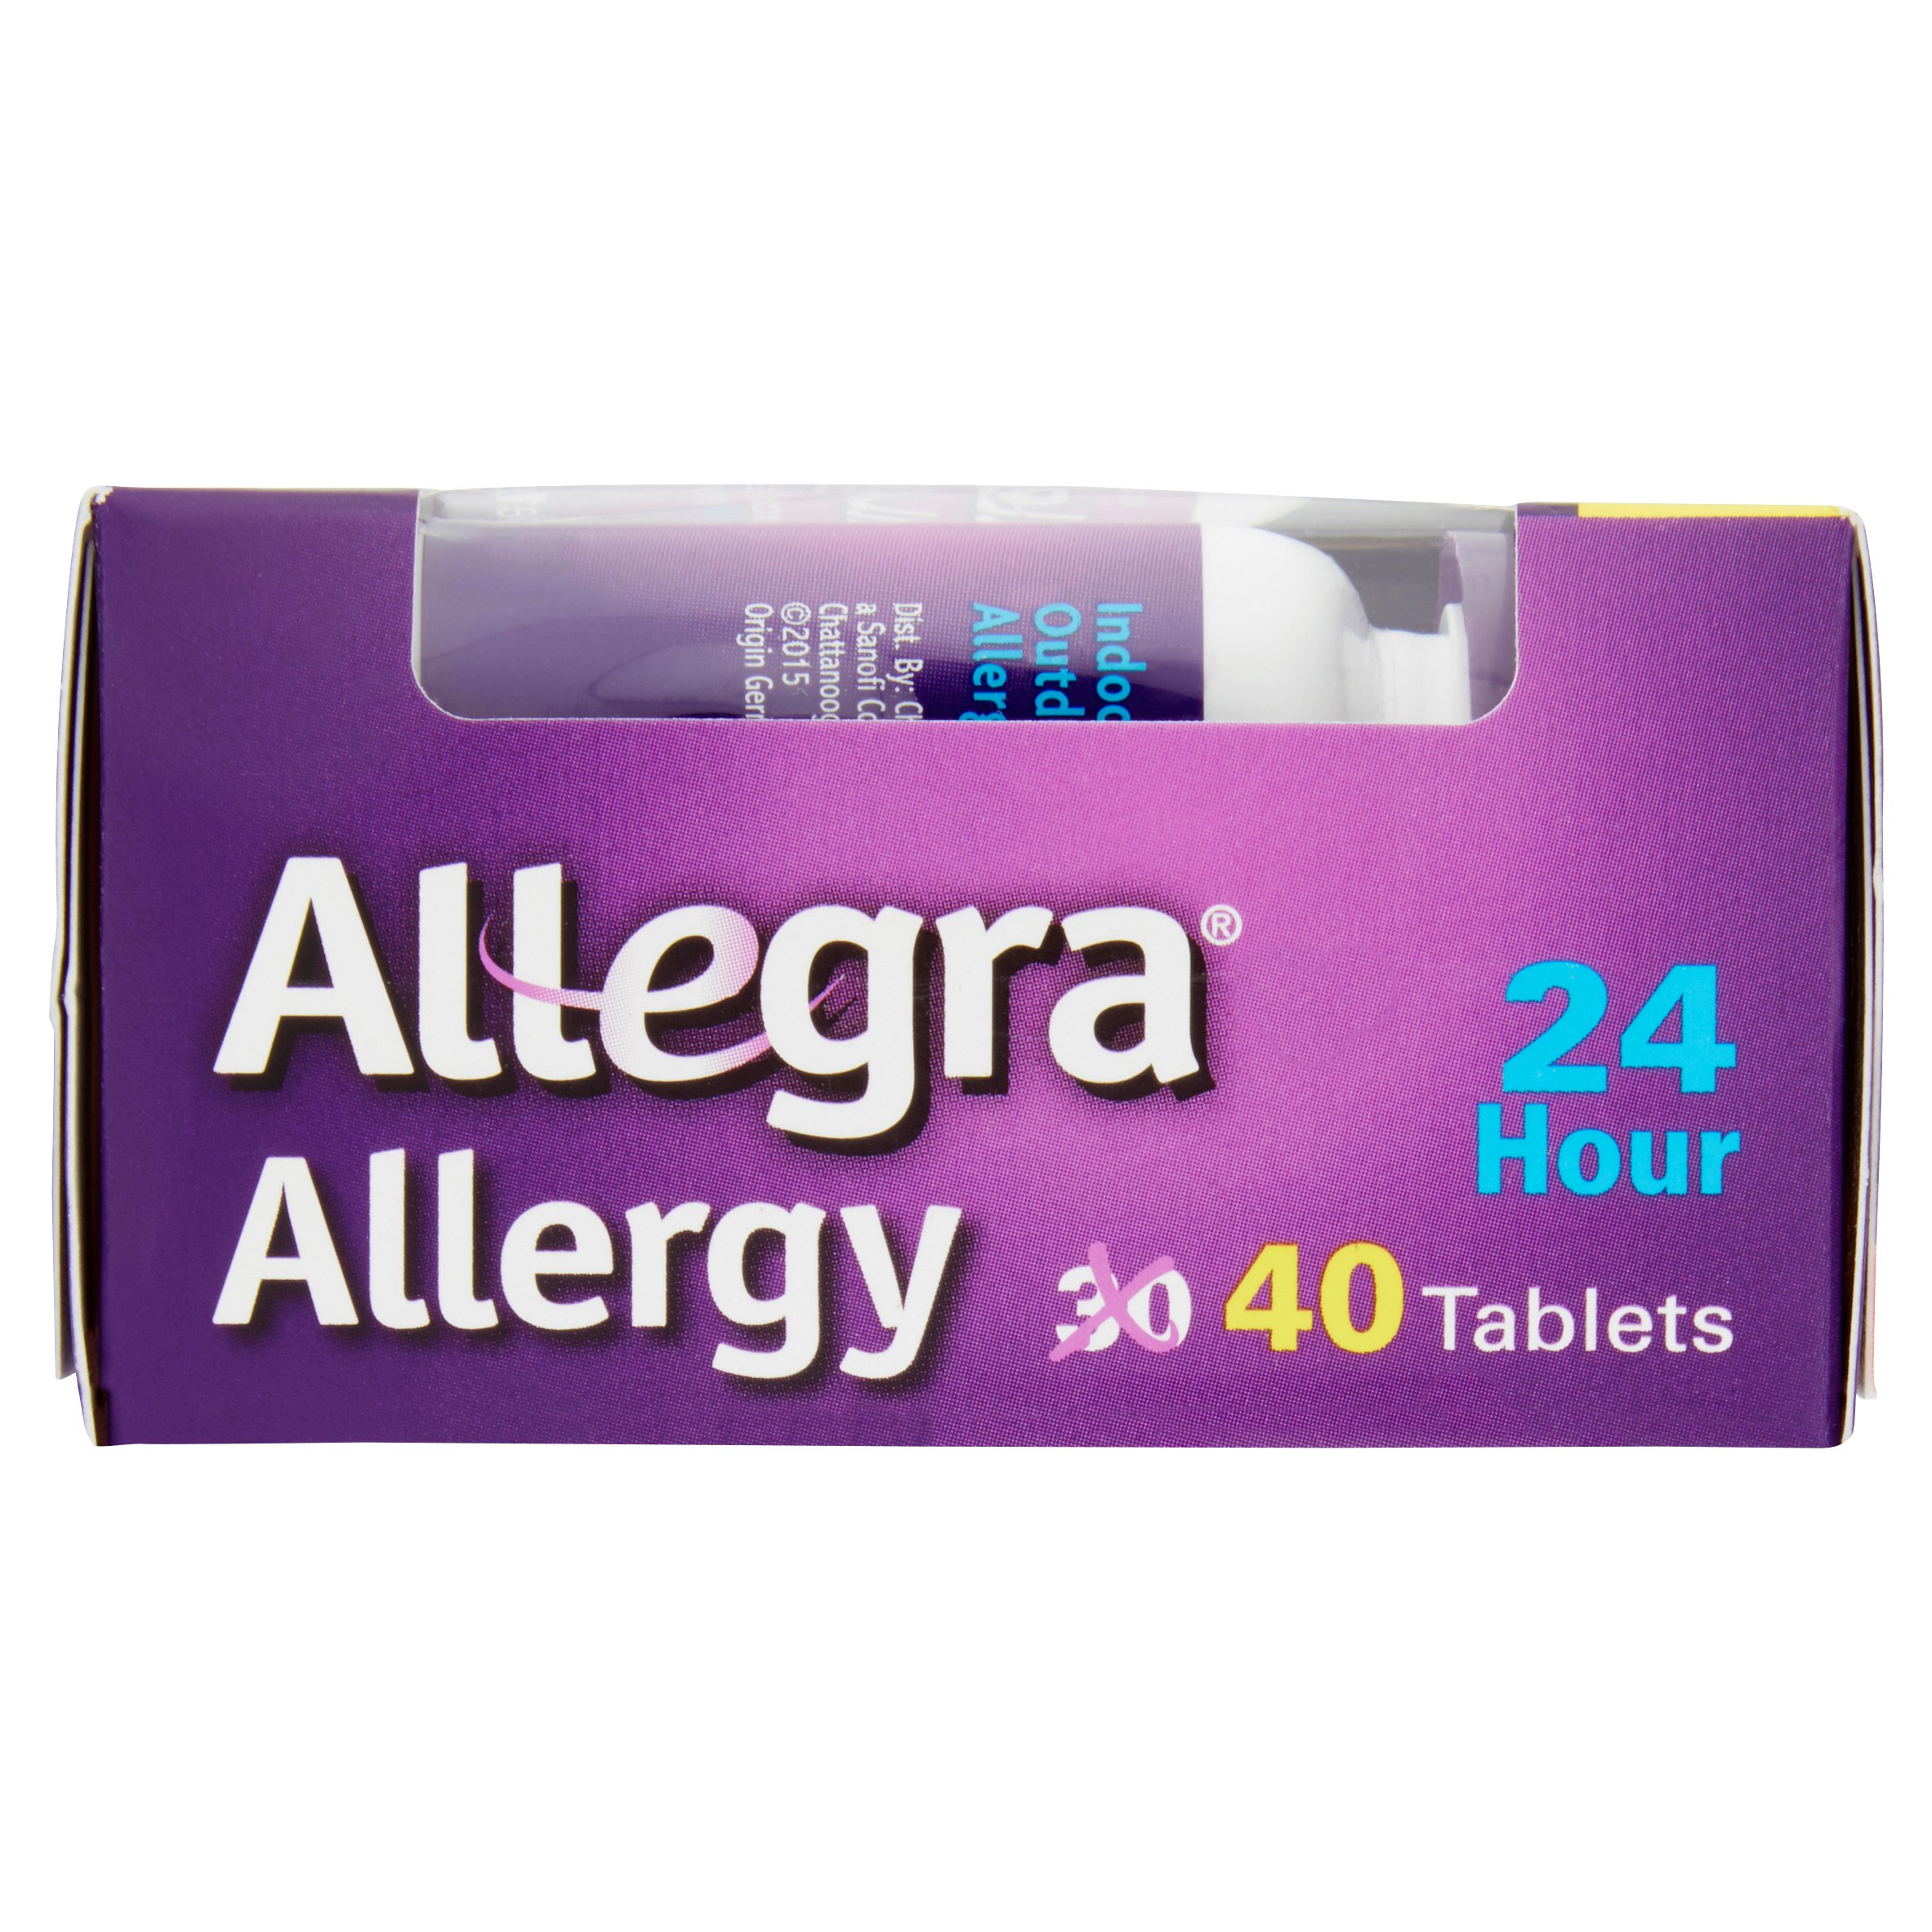 Allegra 24 Hour Allergy Tablets, 40 Ct - image 5 of 5